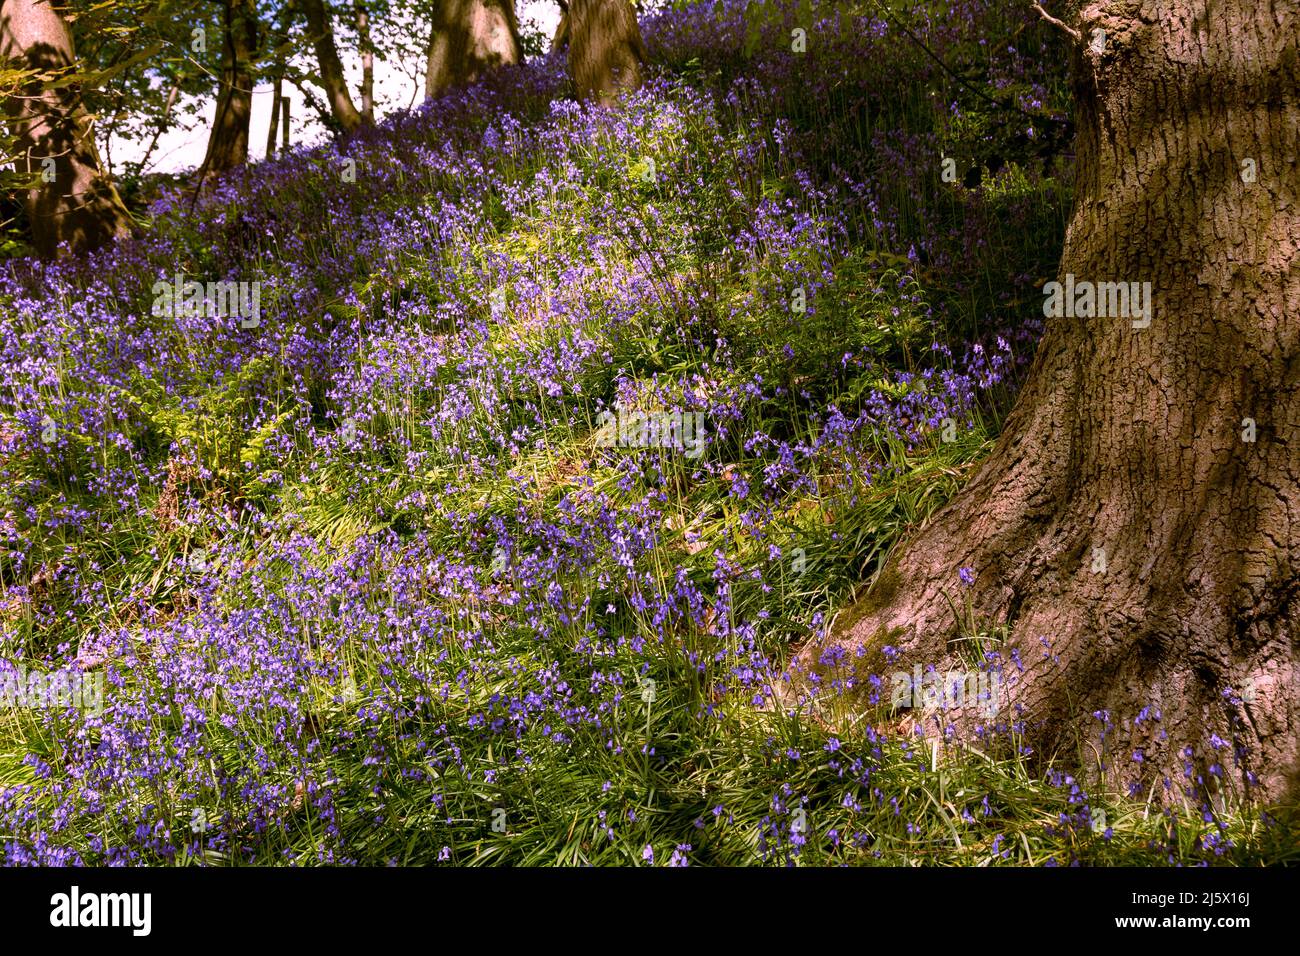 Bluebells in a wood with sunlight in patches Stock Photo